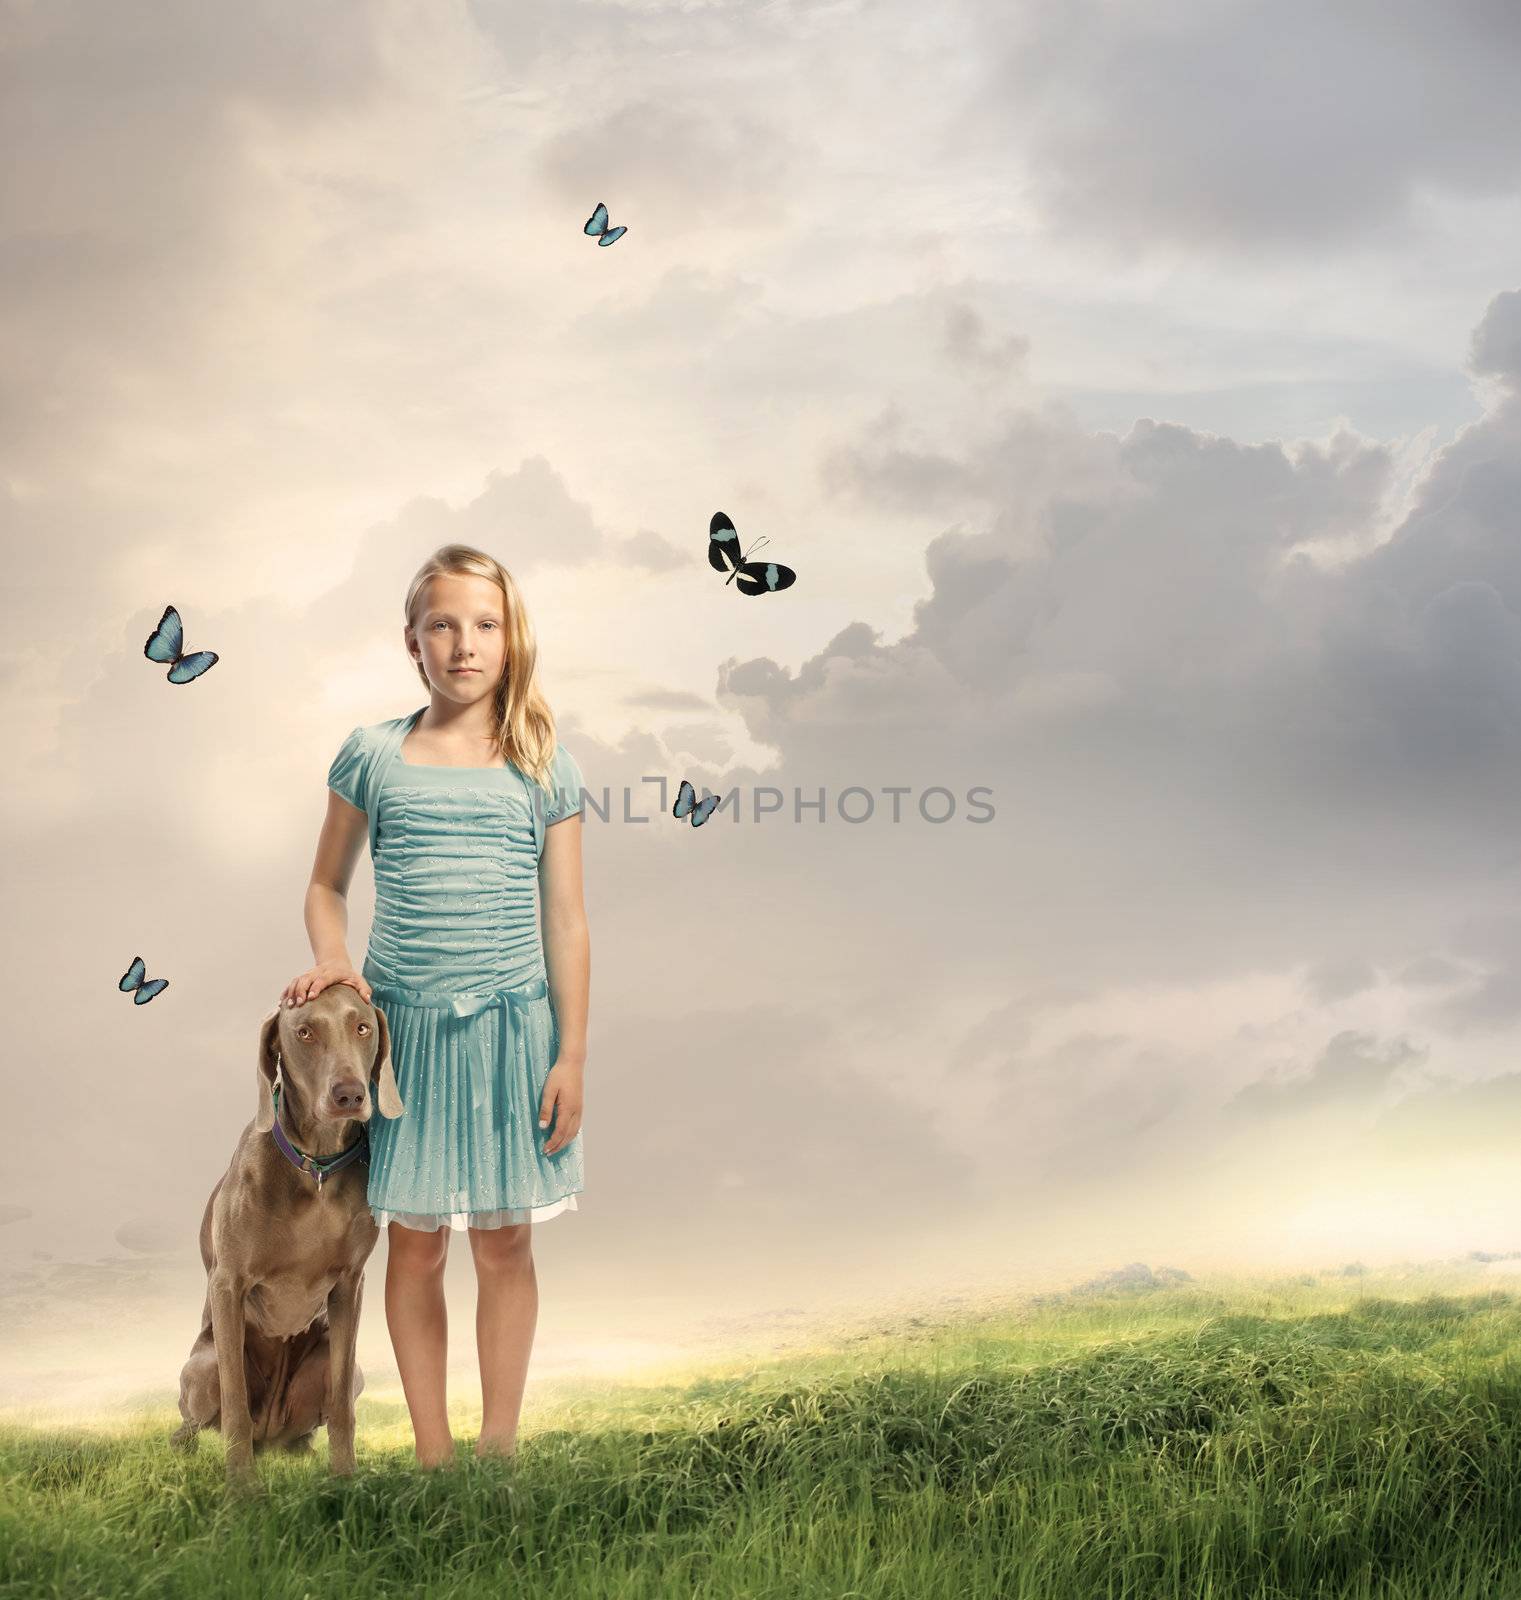 Young Blonde Girl with her Dog on a Magical Mountain